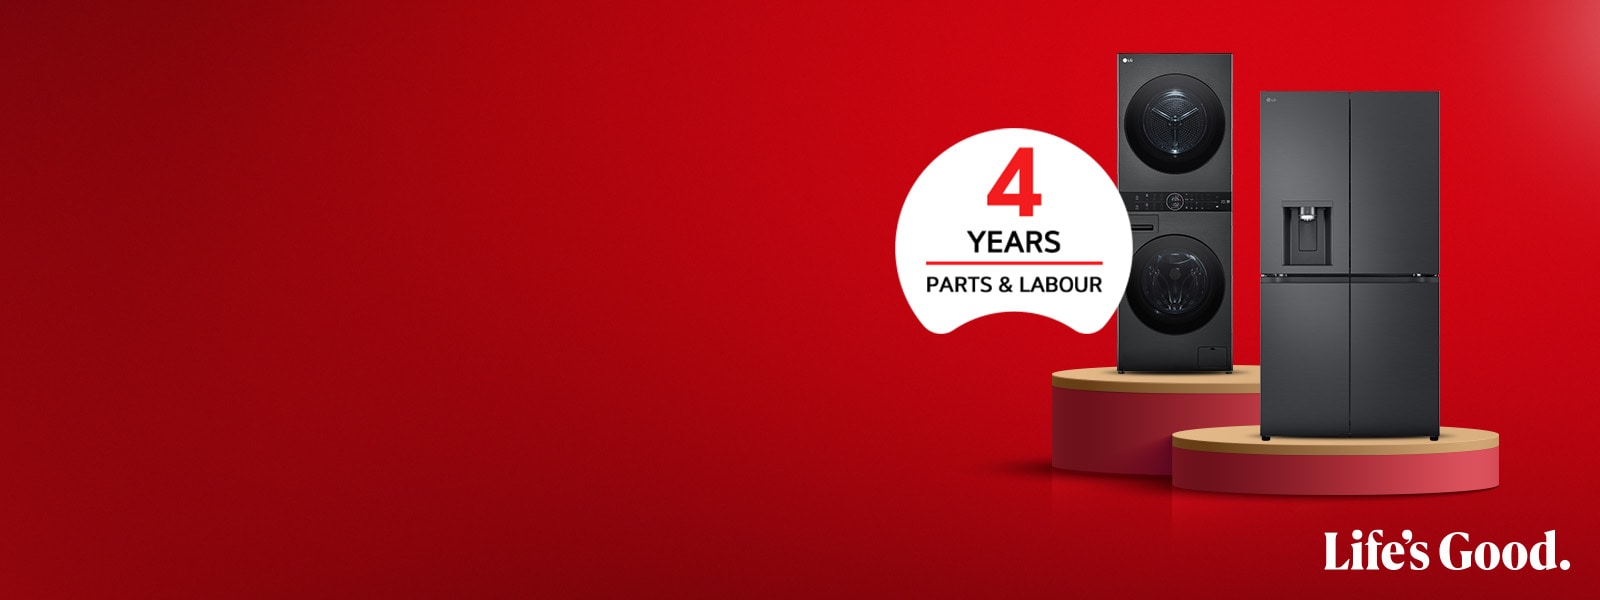 Double up your Standard Warranty to 4 Years*1